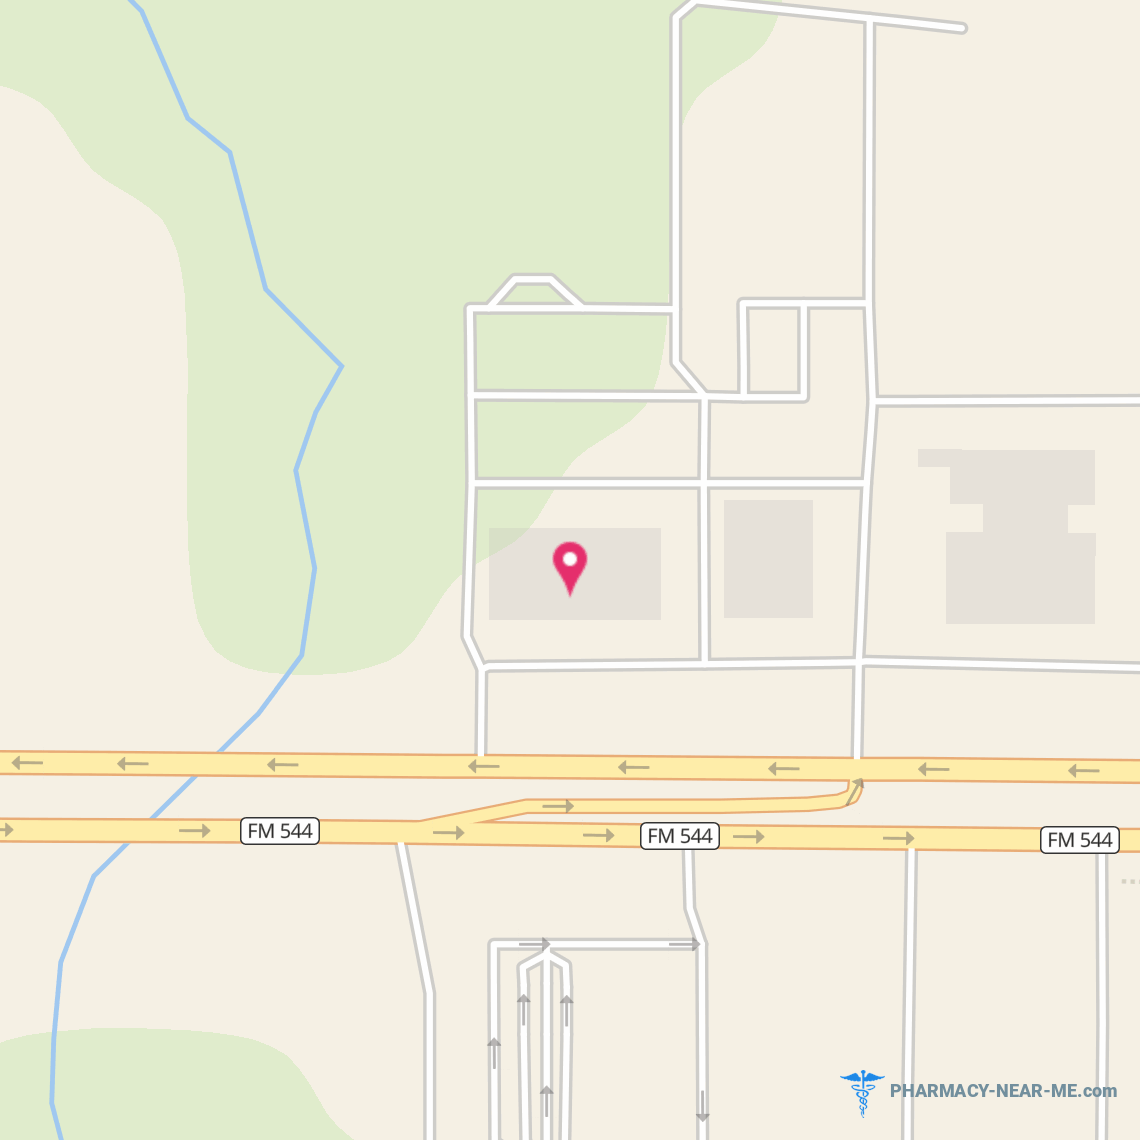 SCRIPX - Pharmacy Hours, Phone, Reviews & Information: 601 W Fm 544, Murphy, Texas 75094, United States